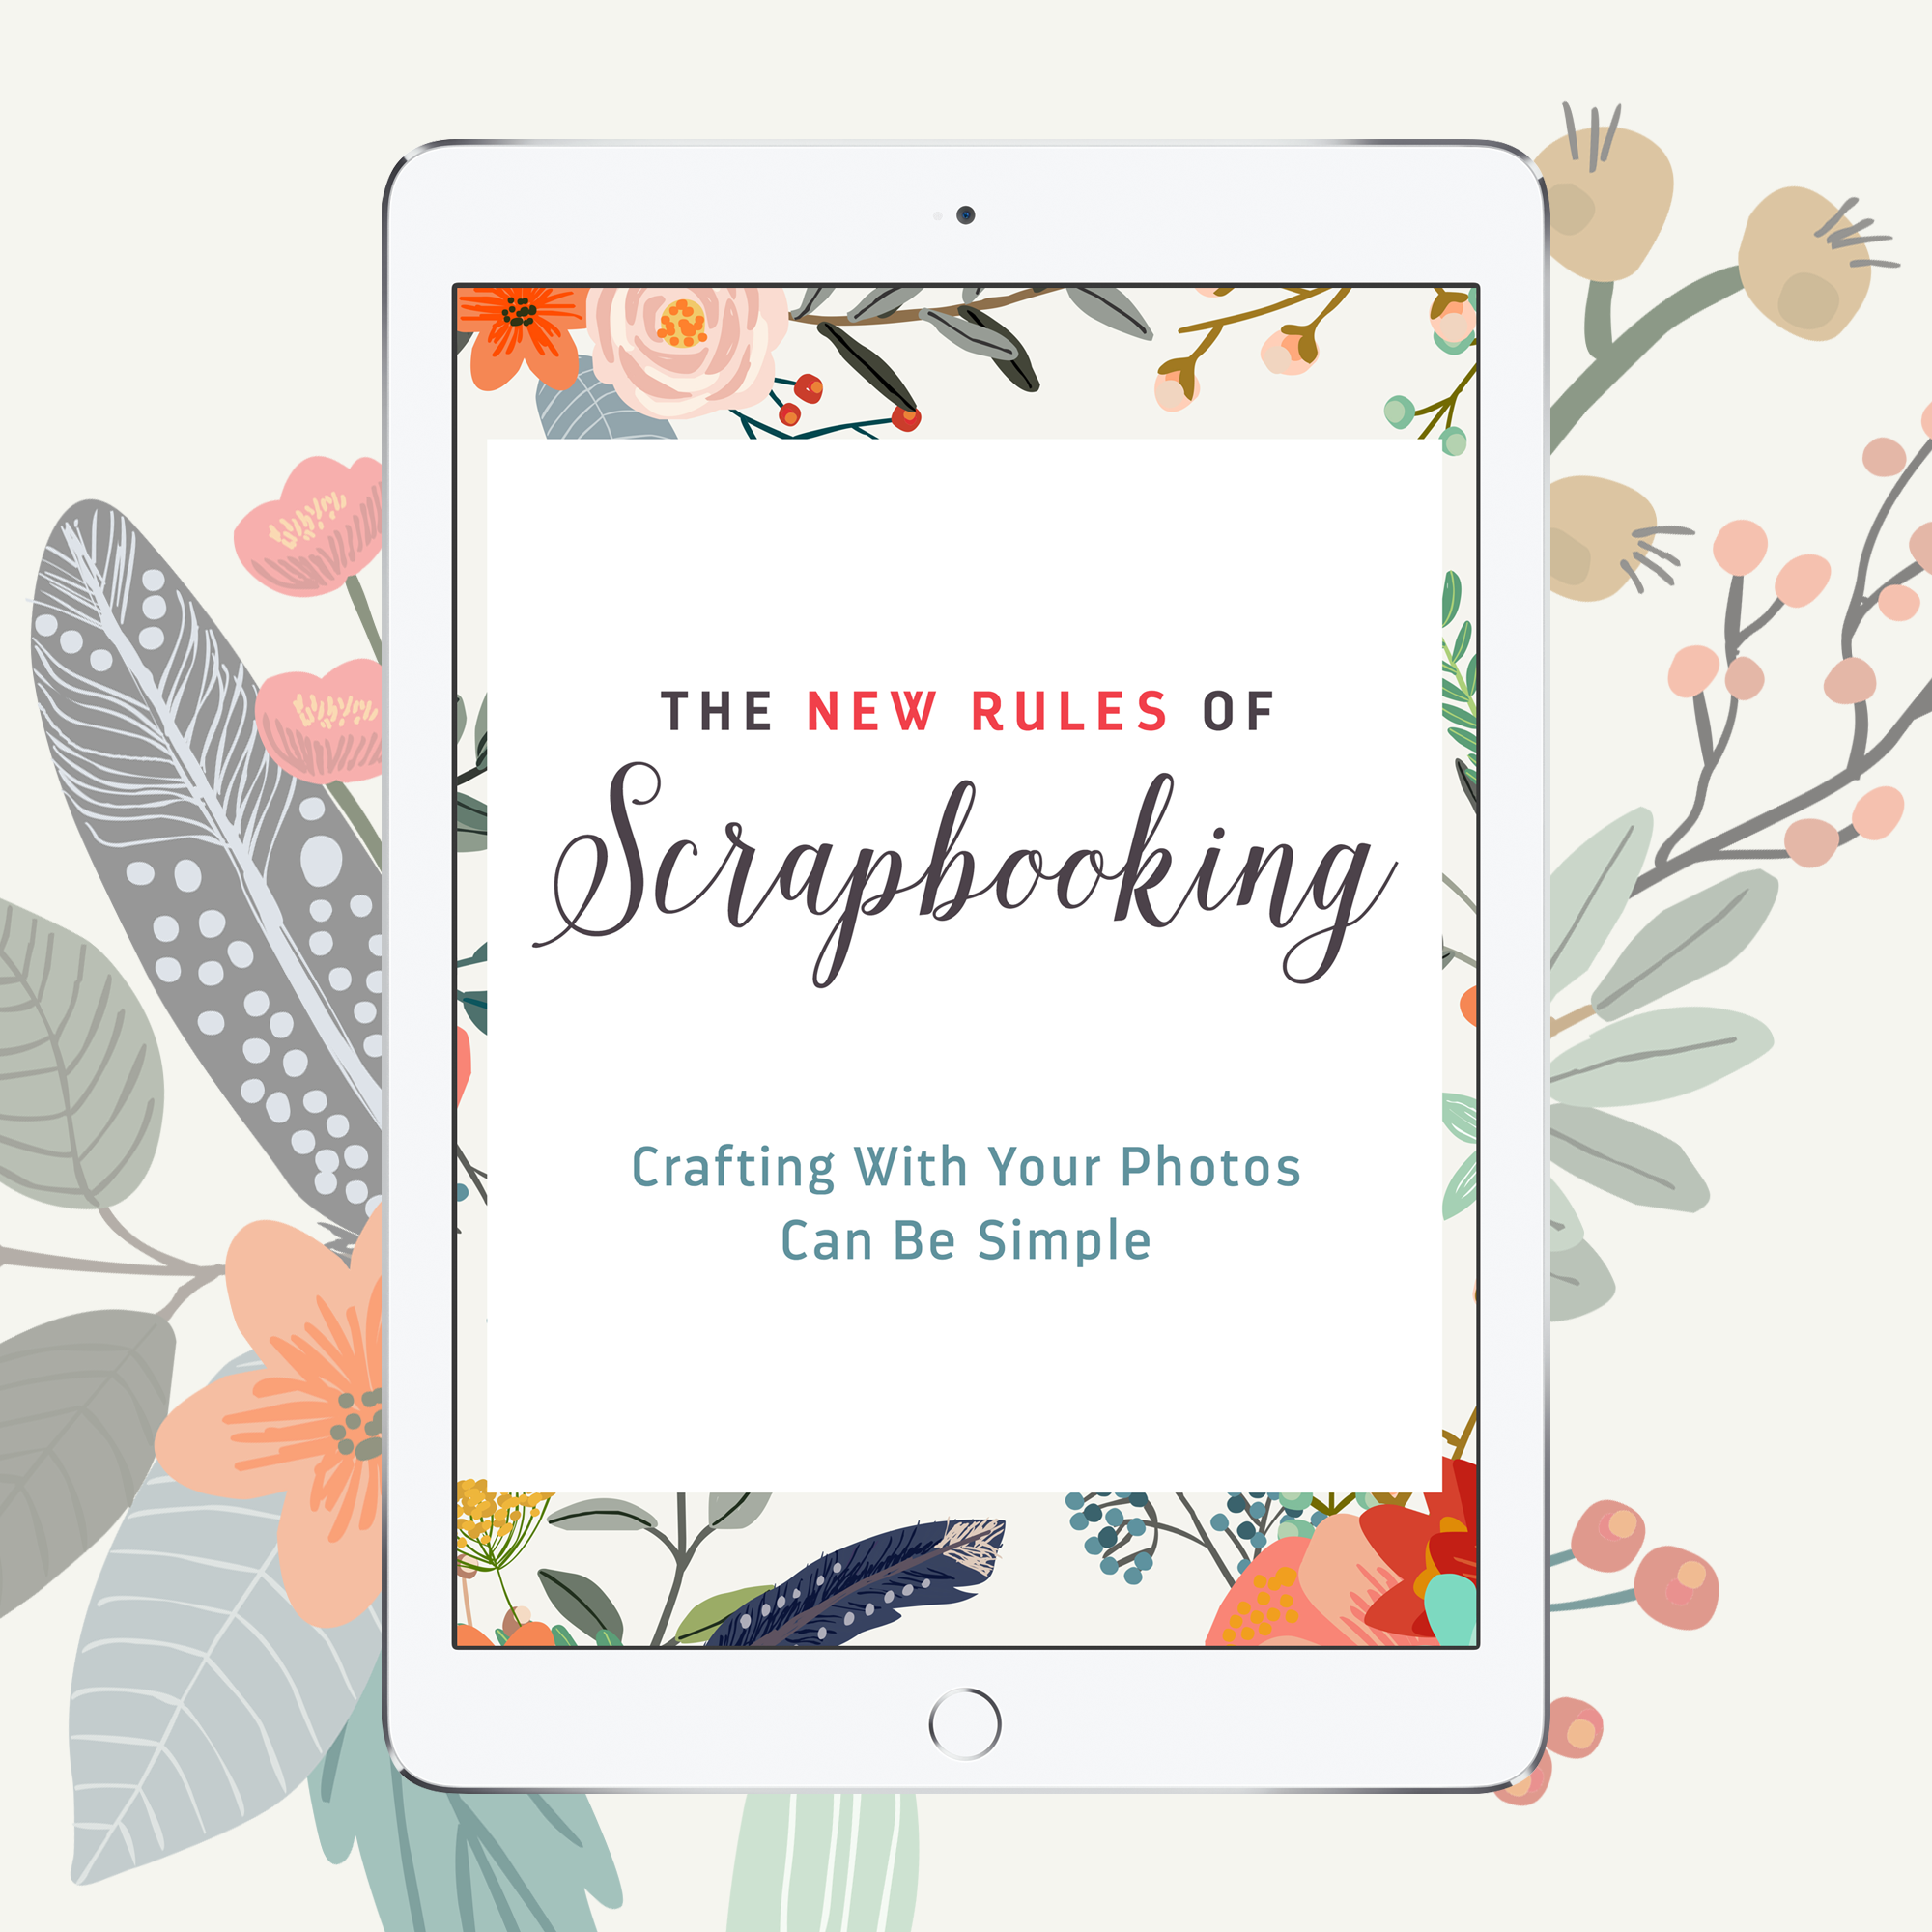 The New Rules of Scrapbooking